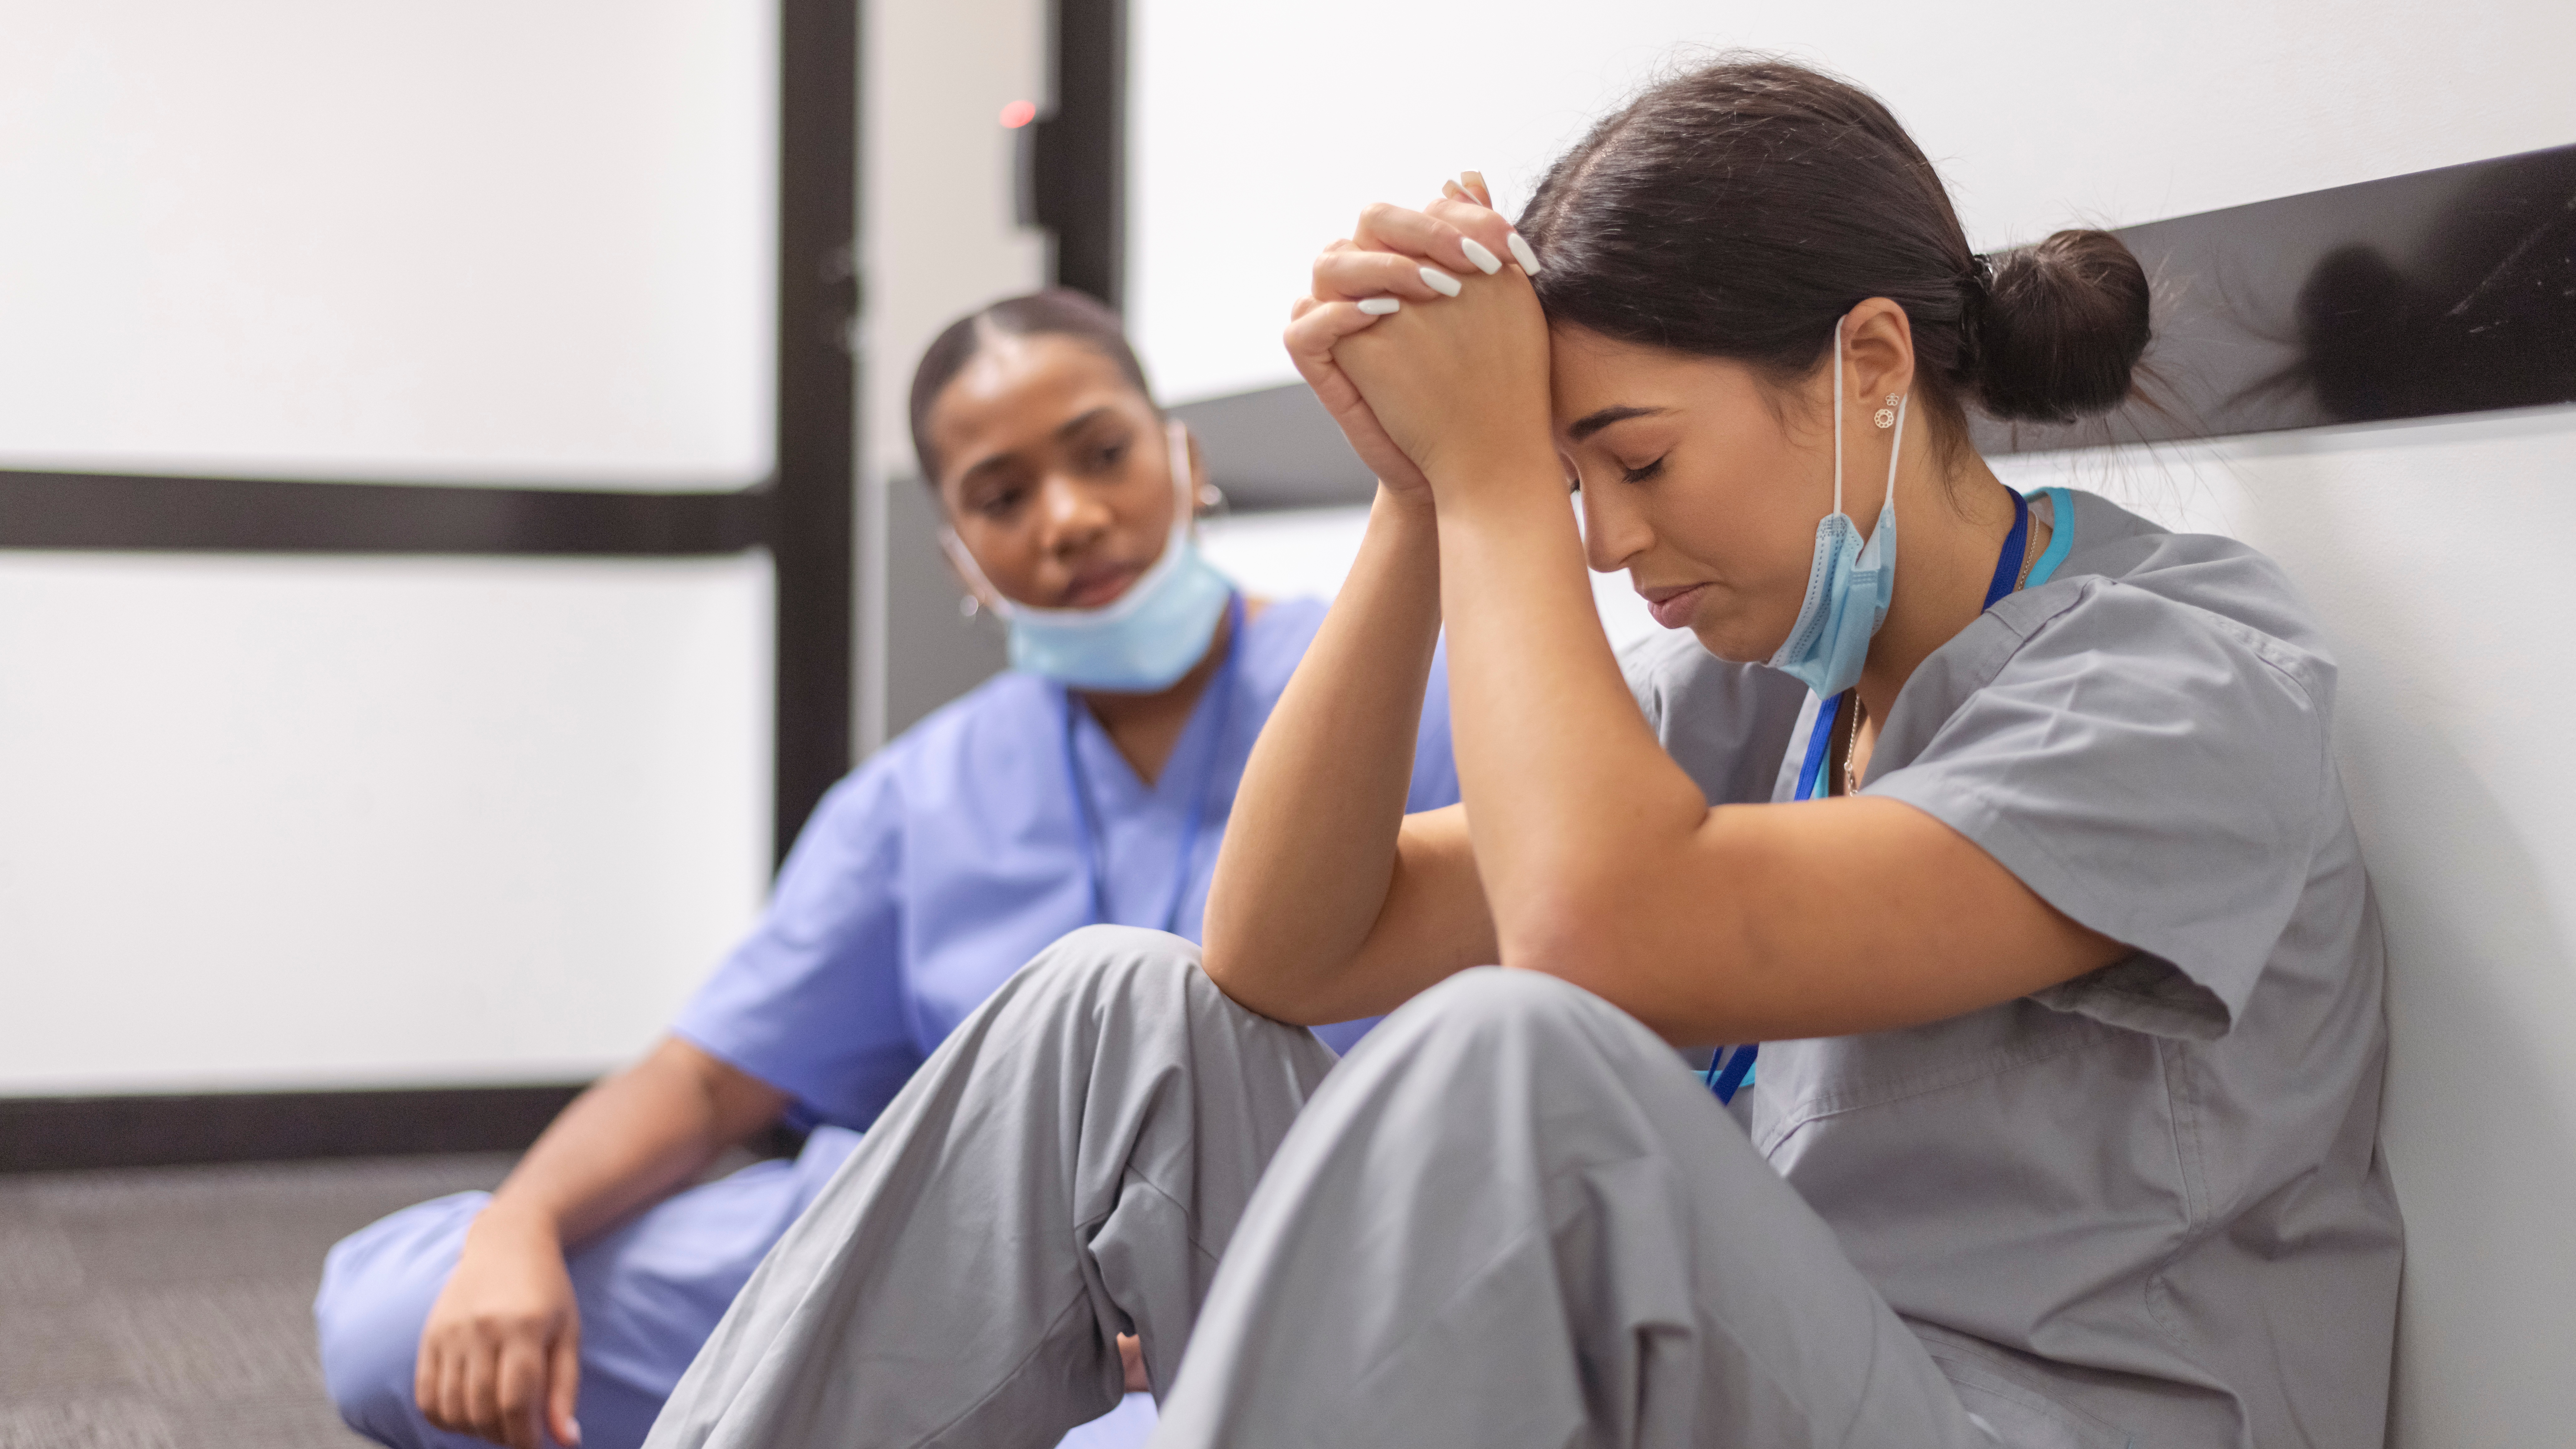 Understaffed and overworked: addressing healthcare labor shortage risks